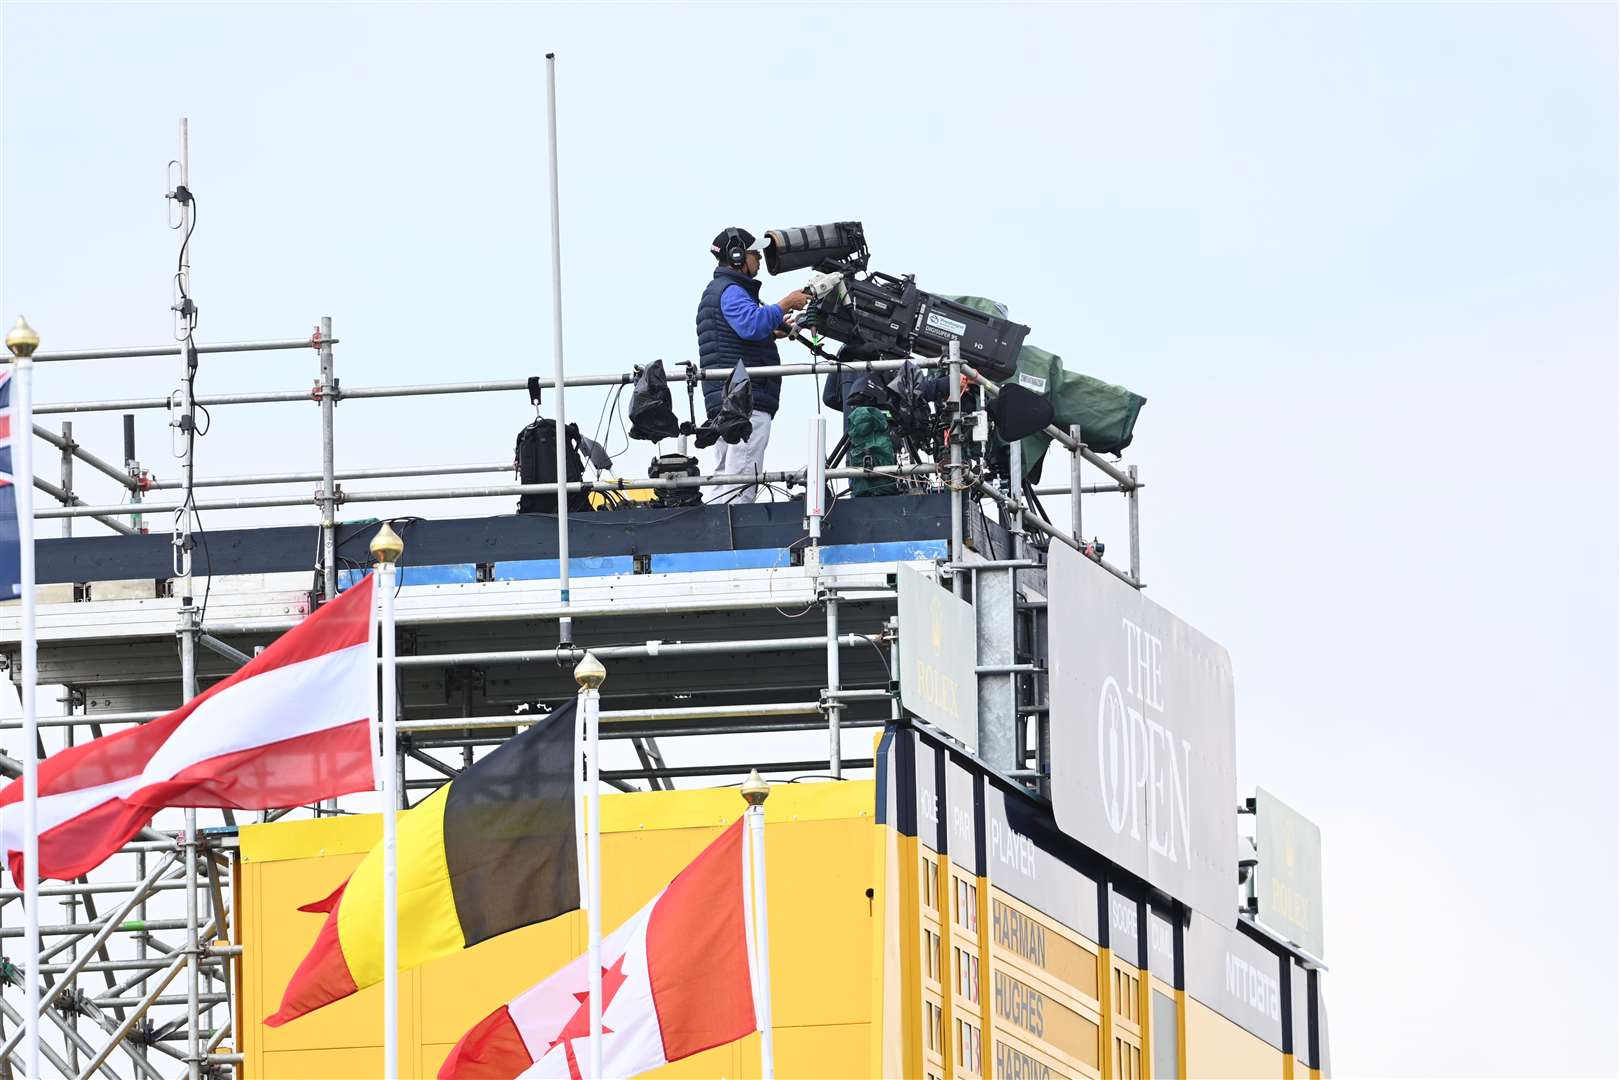 Television cameras broadcast the event around the world. Picture: Barry Goodwin (49262995)